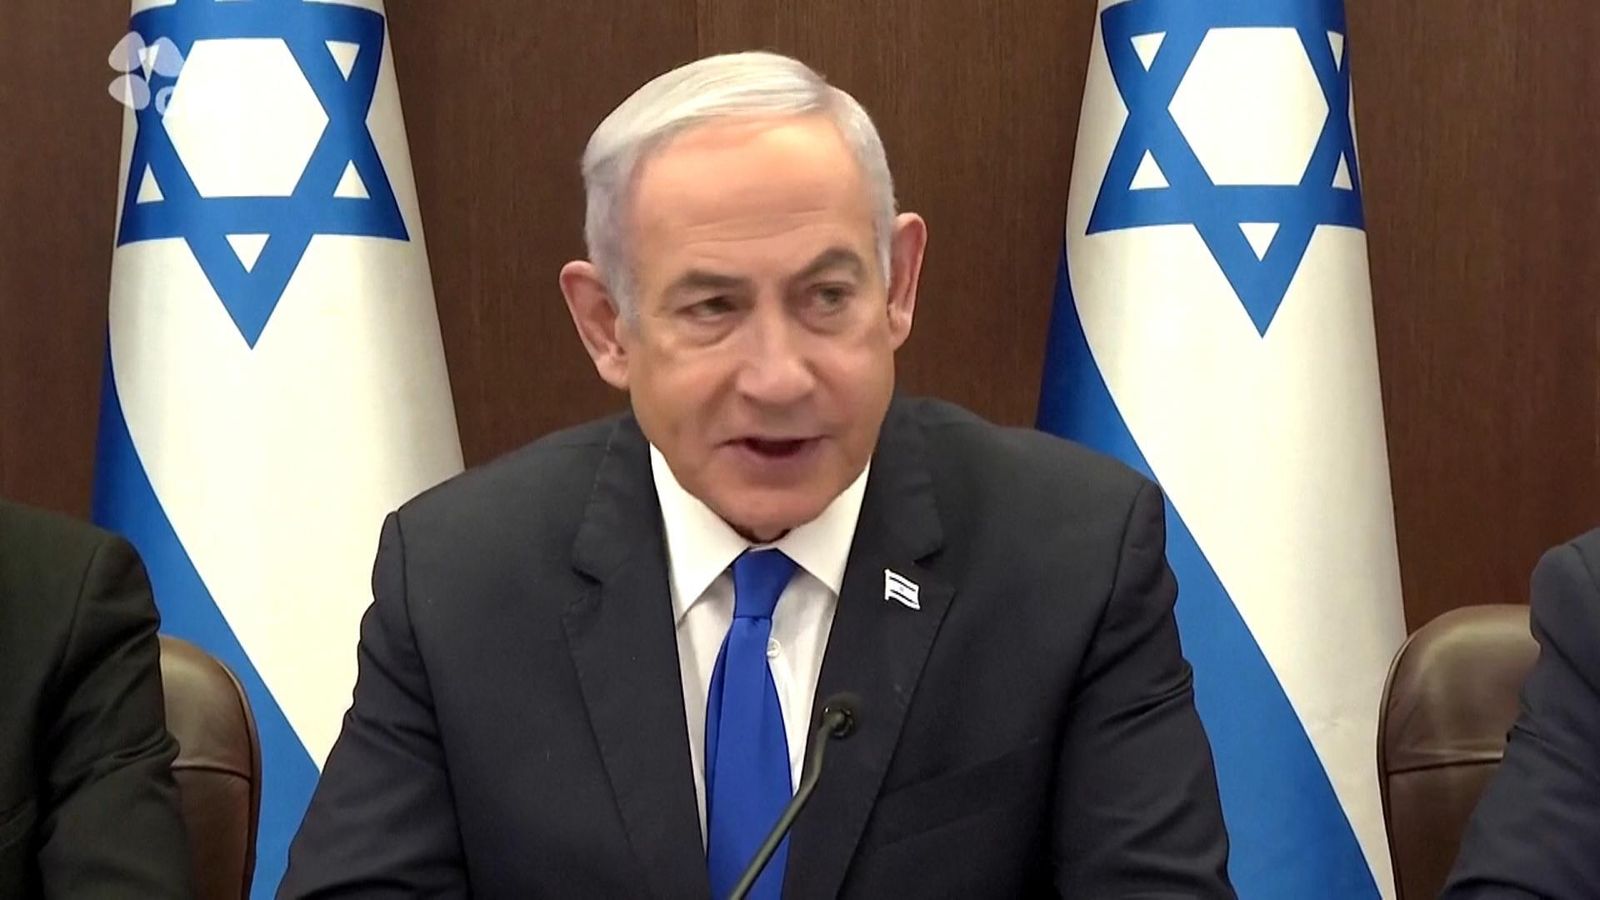 netanyahu rejects ceasefire deal: 'it would leave hamas intact'